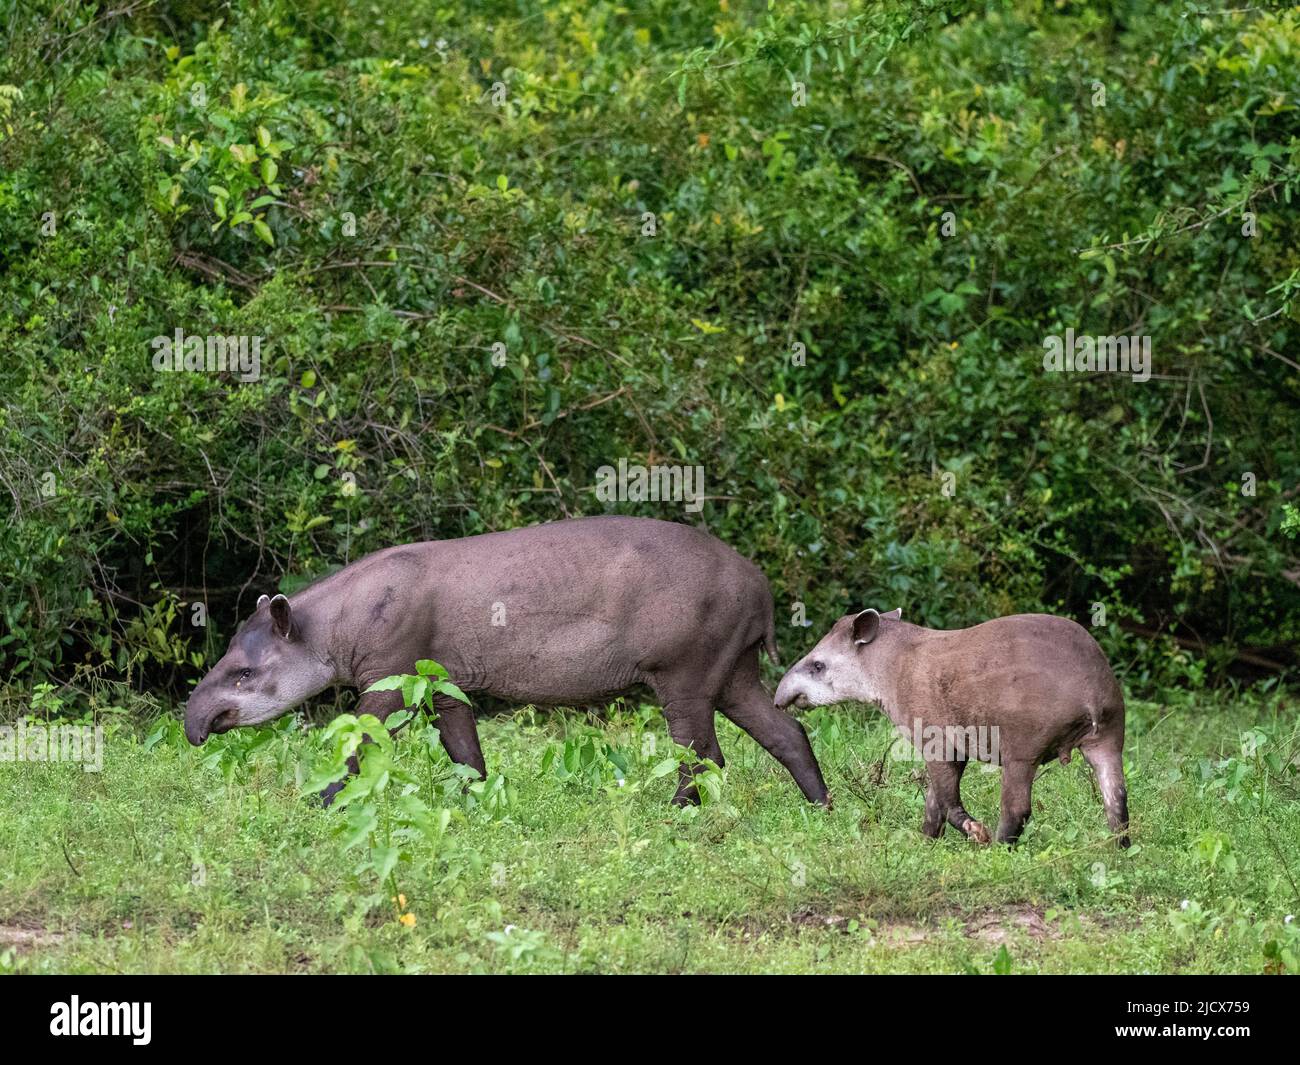 South American tapir (Tapirus terrestris), mother and calf at Pouso Allegre, Mato Grosso, Pantanal, Brazil, South America Stock Photo